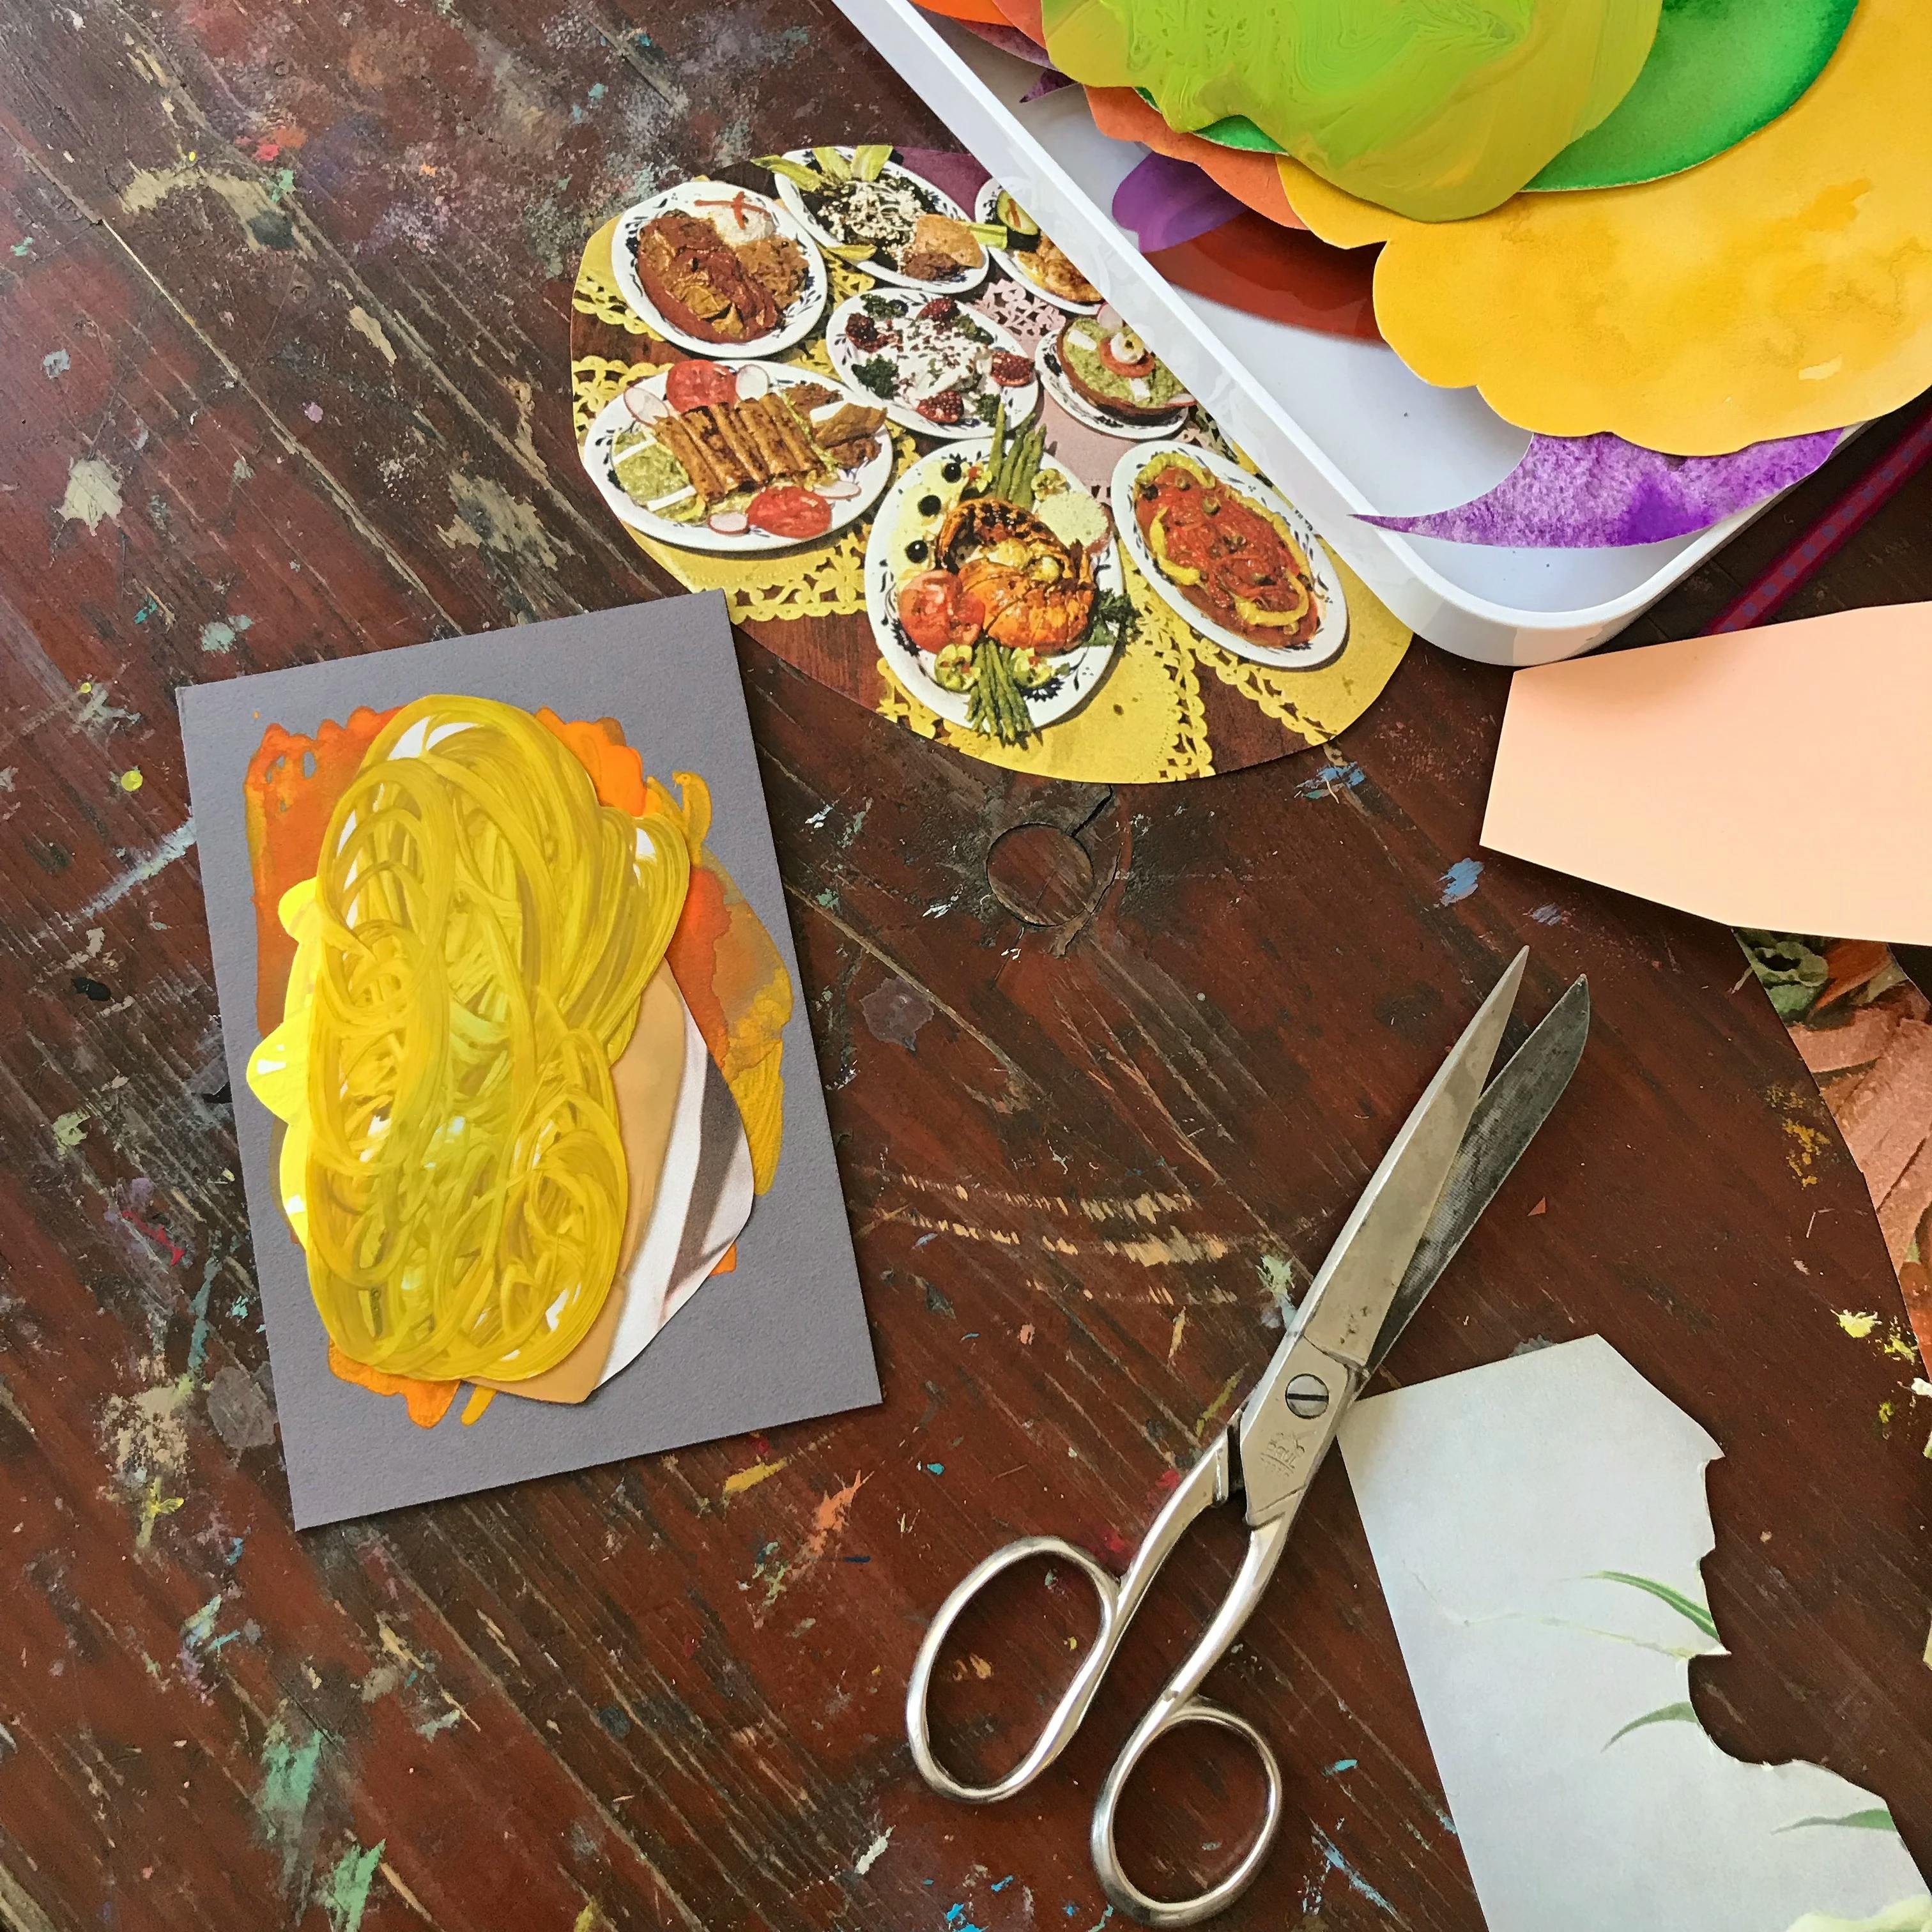 An in-progress yellow work by artist Xochi Solis next to a pile of source material in her studio.